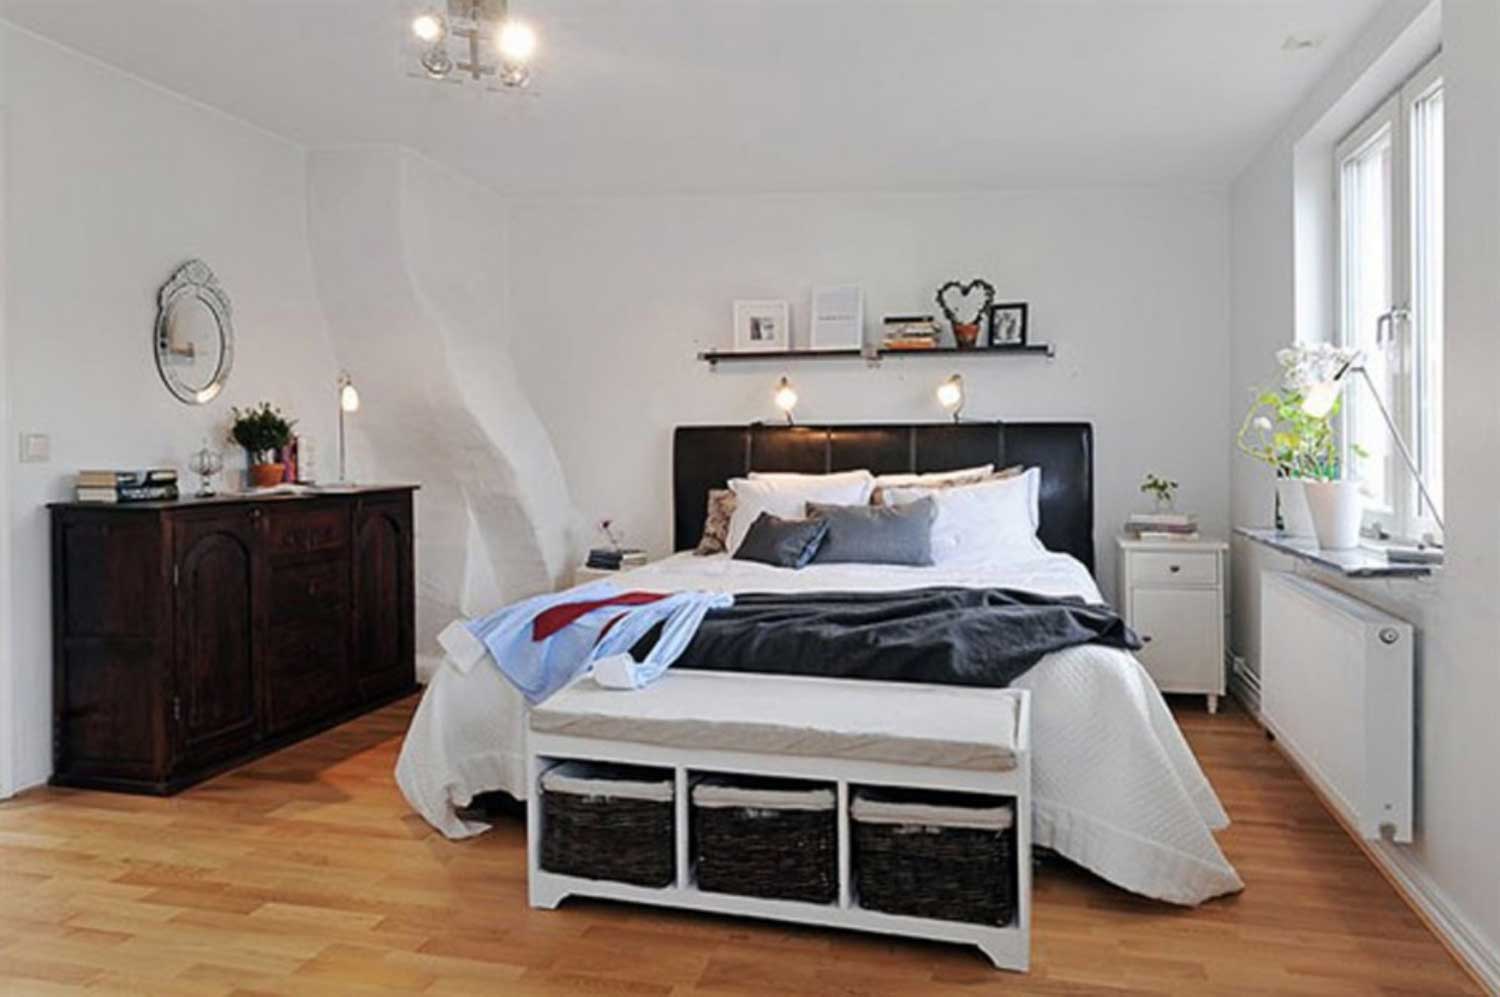 Modern Interior Small Remarkable Modern Interior Design For Small Master Bedroom Apartments Idea With Interesting Black Leather Headboard Design And Charming White Bed Linen Idea Interior Design The Stylish And New Ideas Of Modern Interior Design